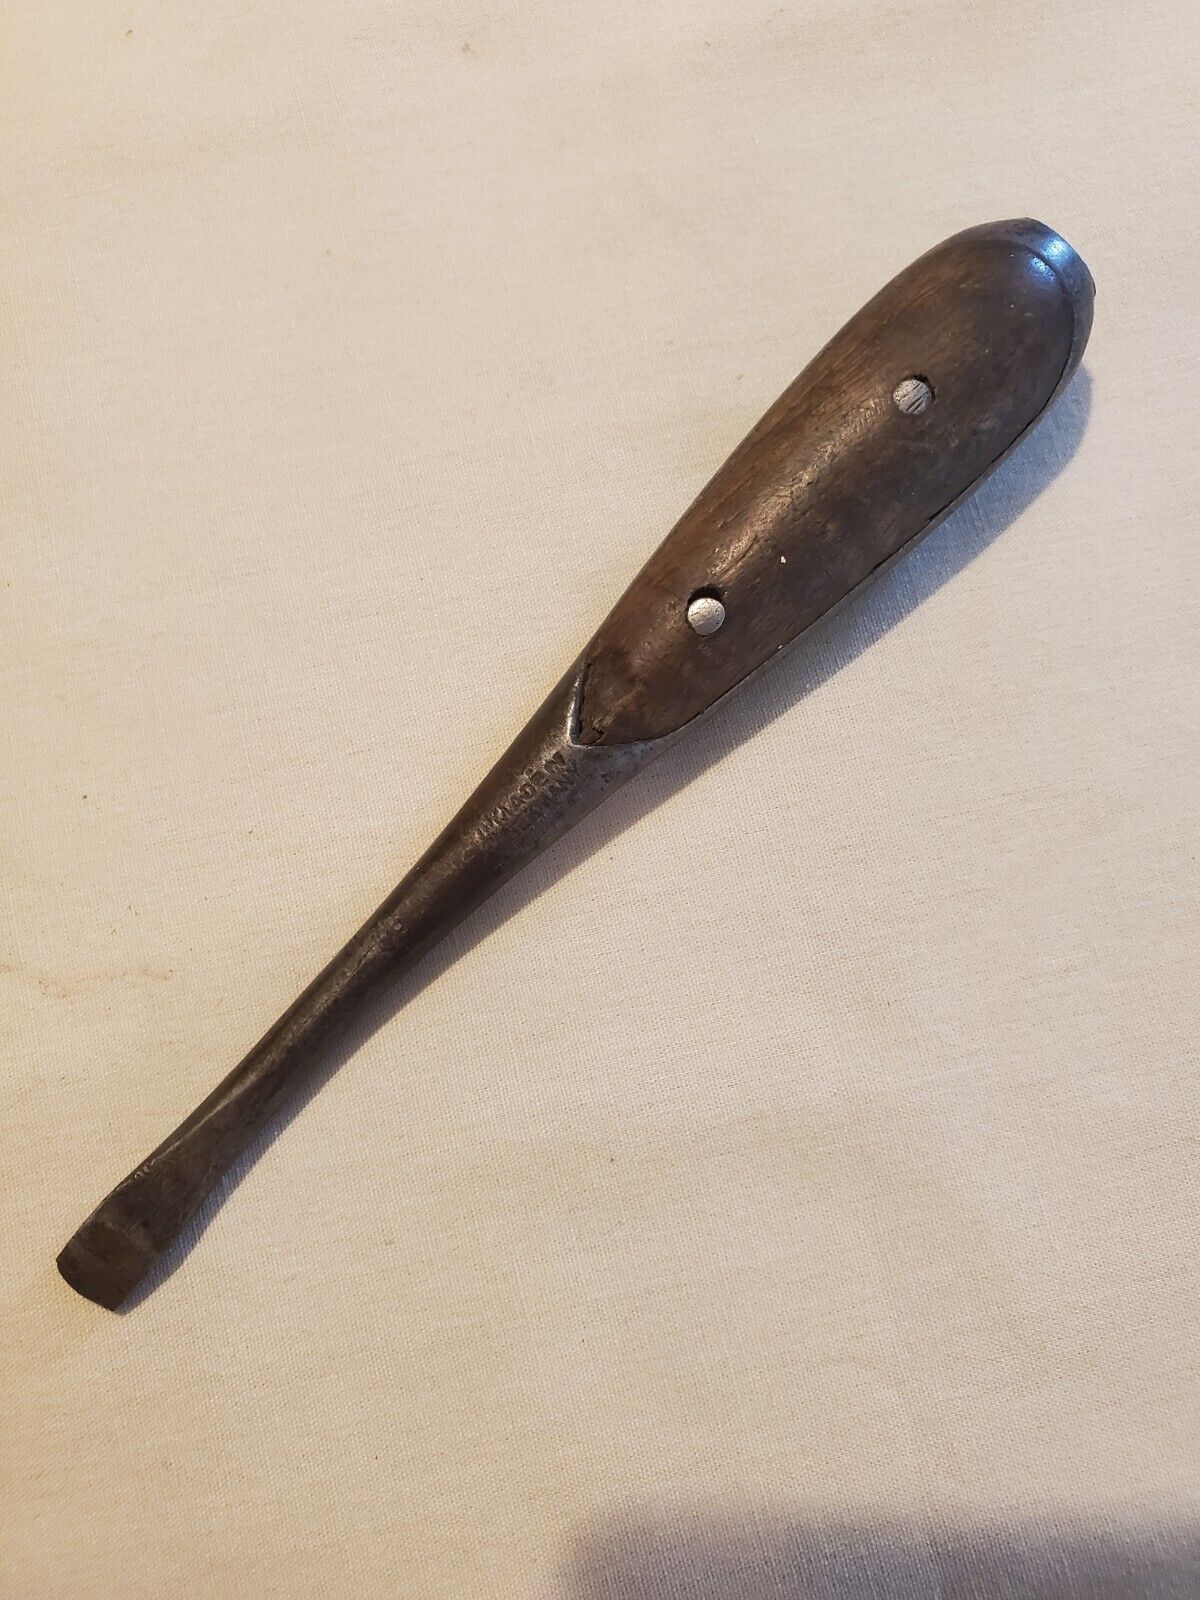 Small Antique German Wood Handle Screwdriver   5 1/2 in.